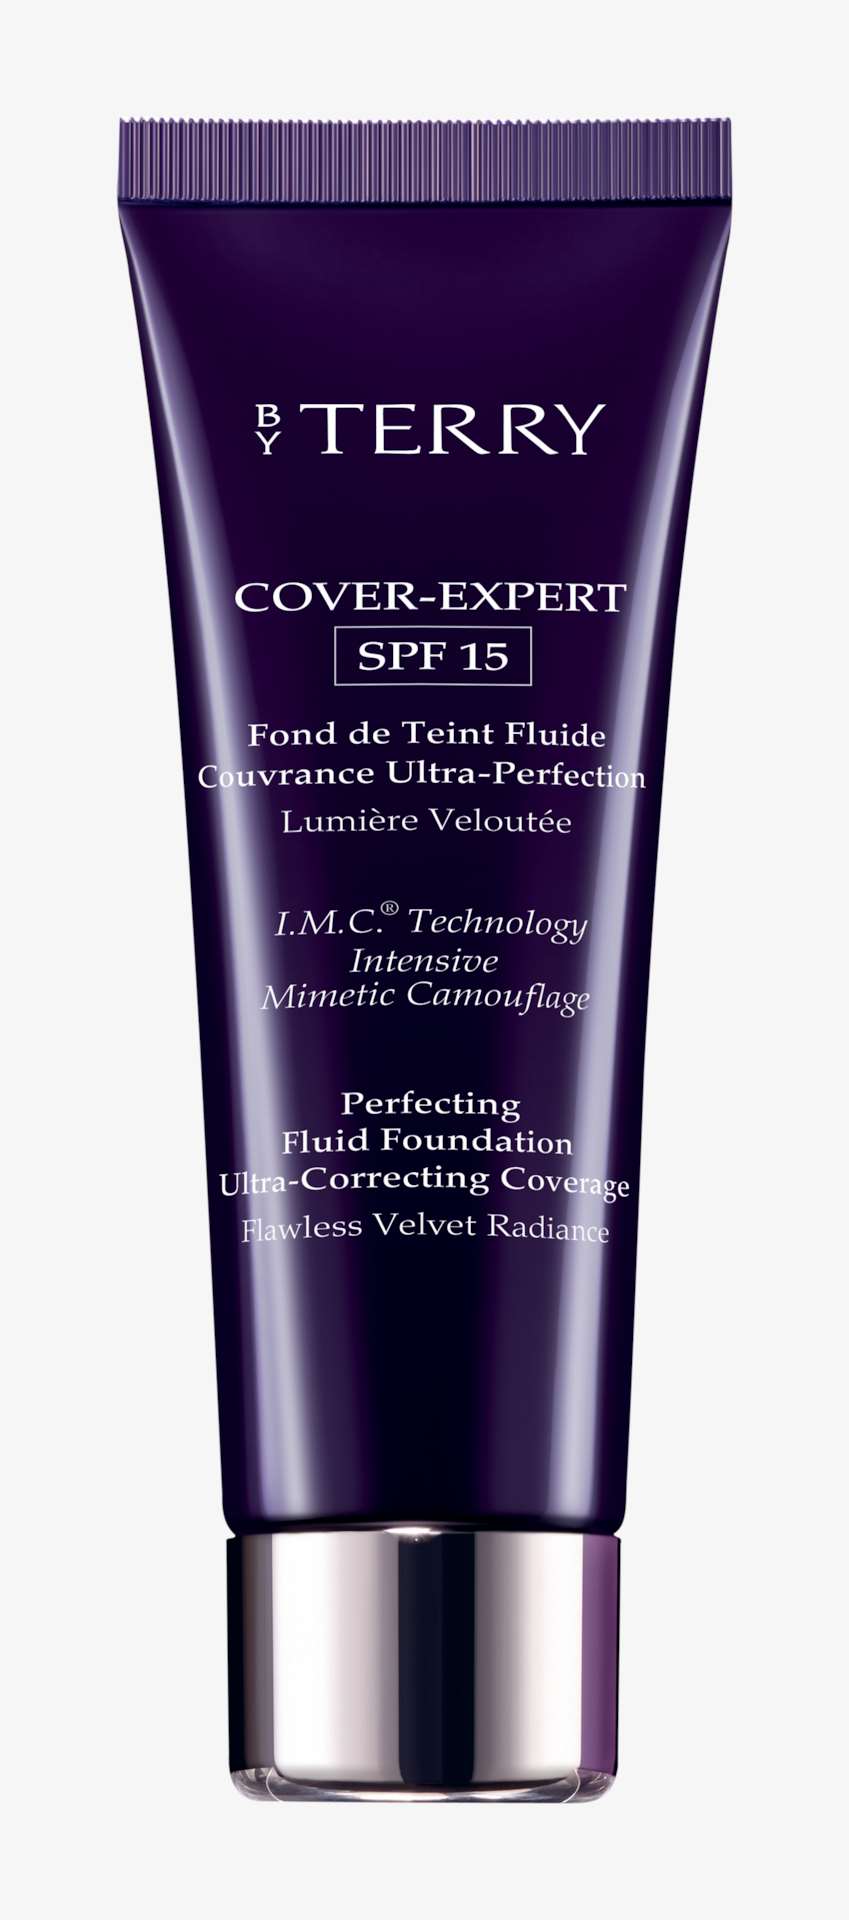 By Terry Cover Expert Perfecting Fluid Foundation SPF15 35ml